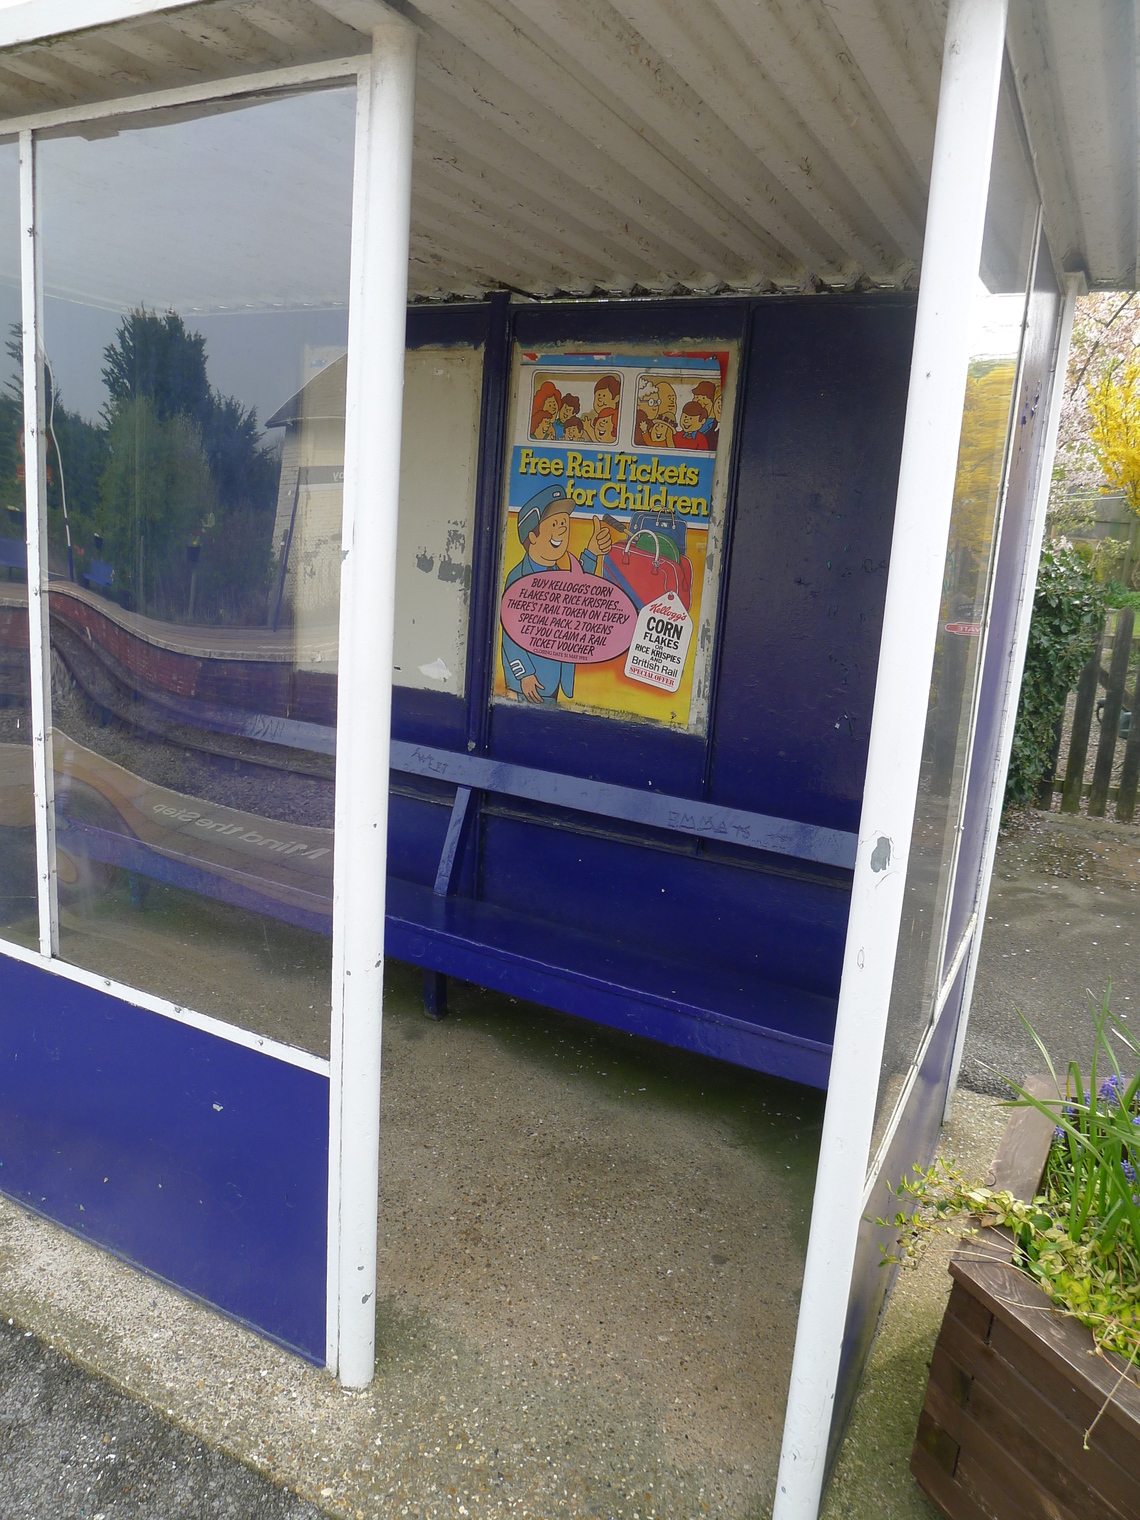 Old Waiting Shelter on Platform 1 at Hunmanby showing heritage bench and poster